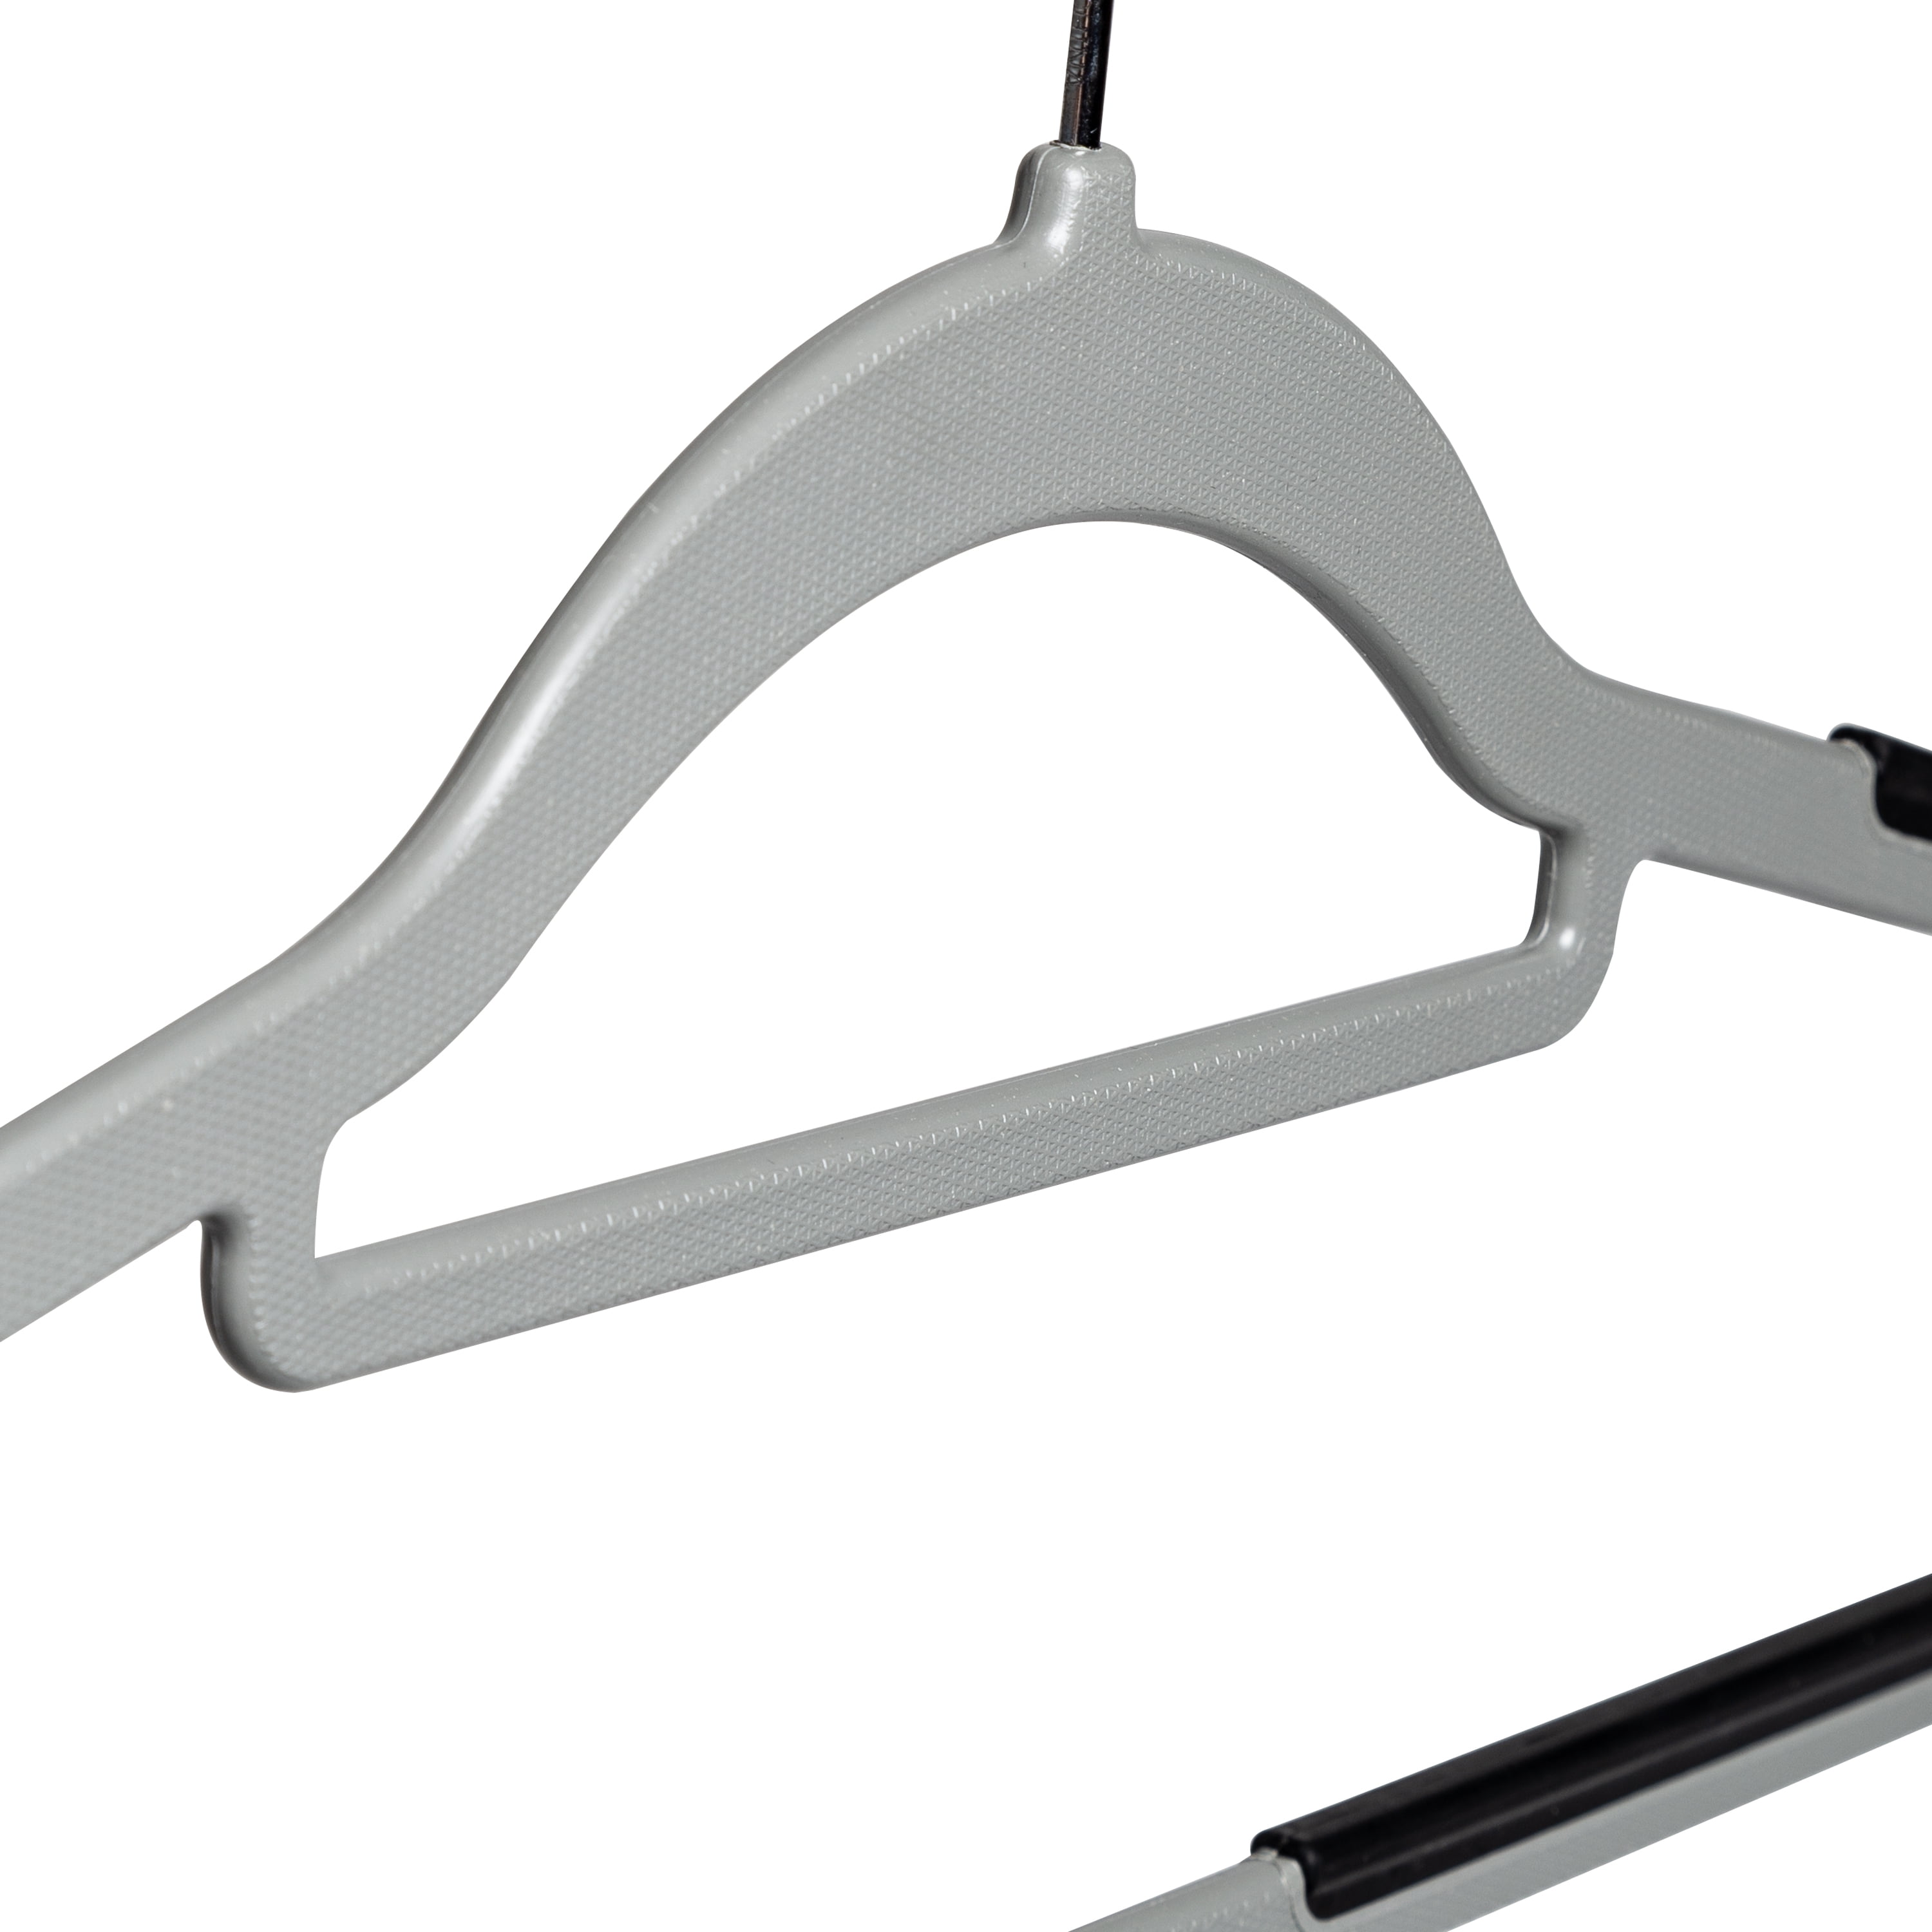 Clothes Hangers Pair Gray Plastic Strap Hooks 16.5 inch 2 Pieces